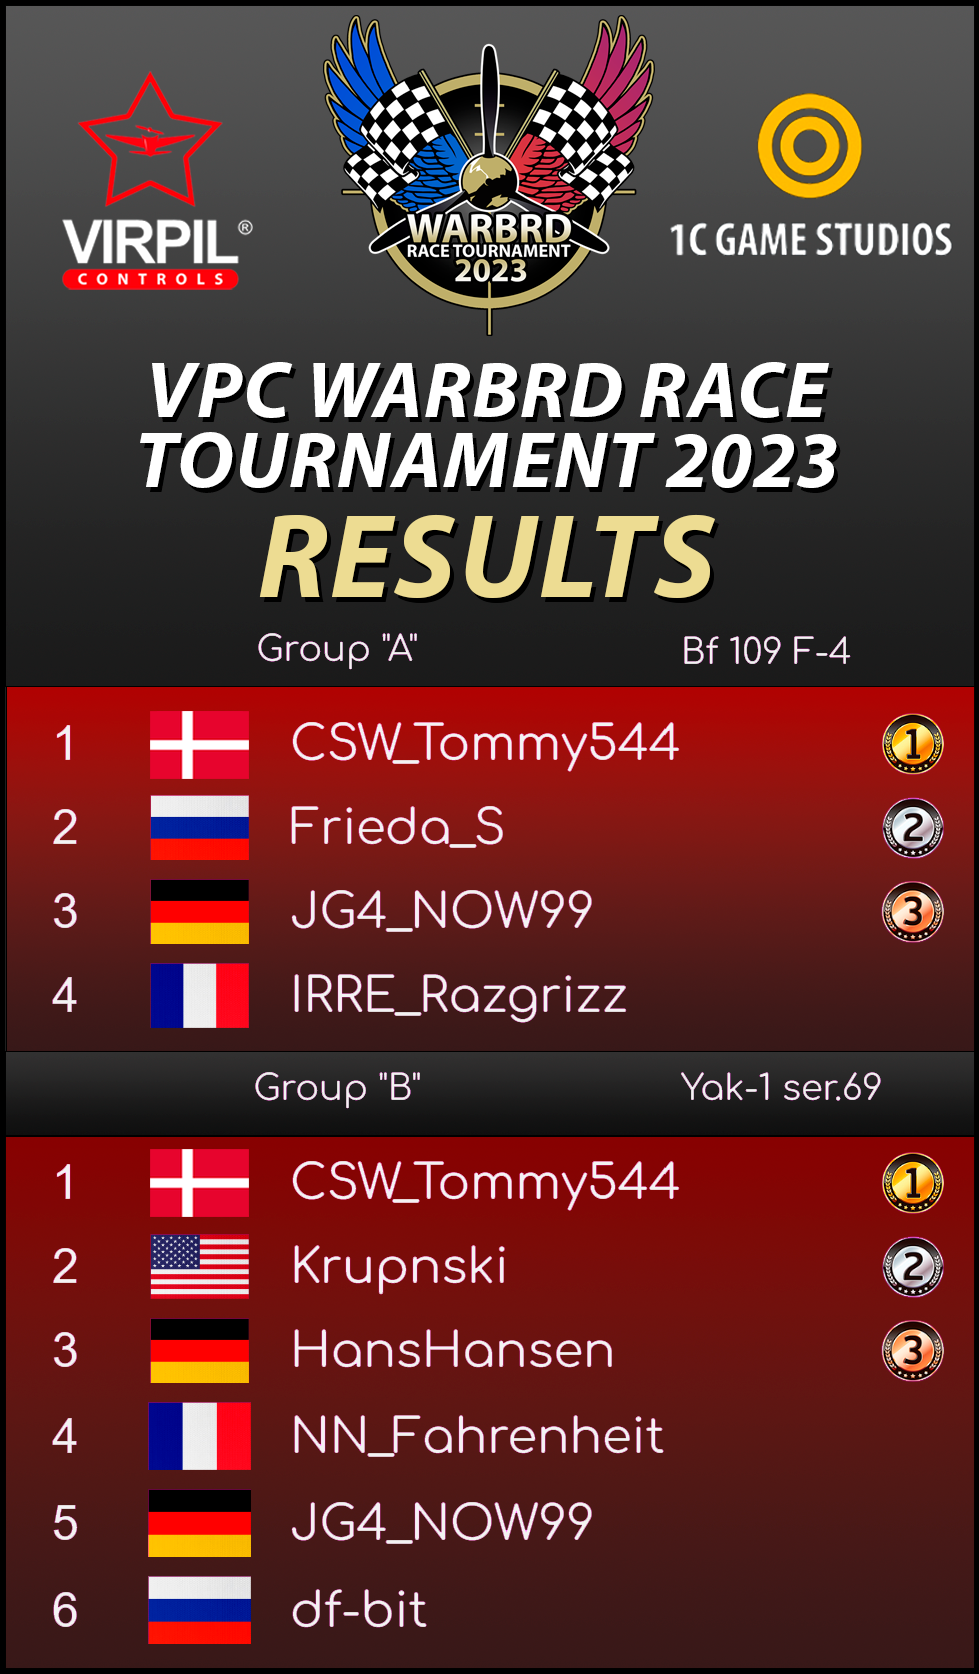 WarBRD Race Tournament has ended!